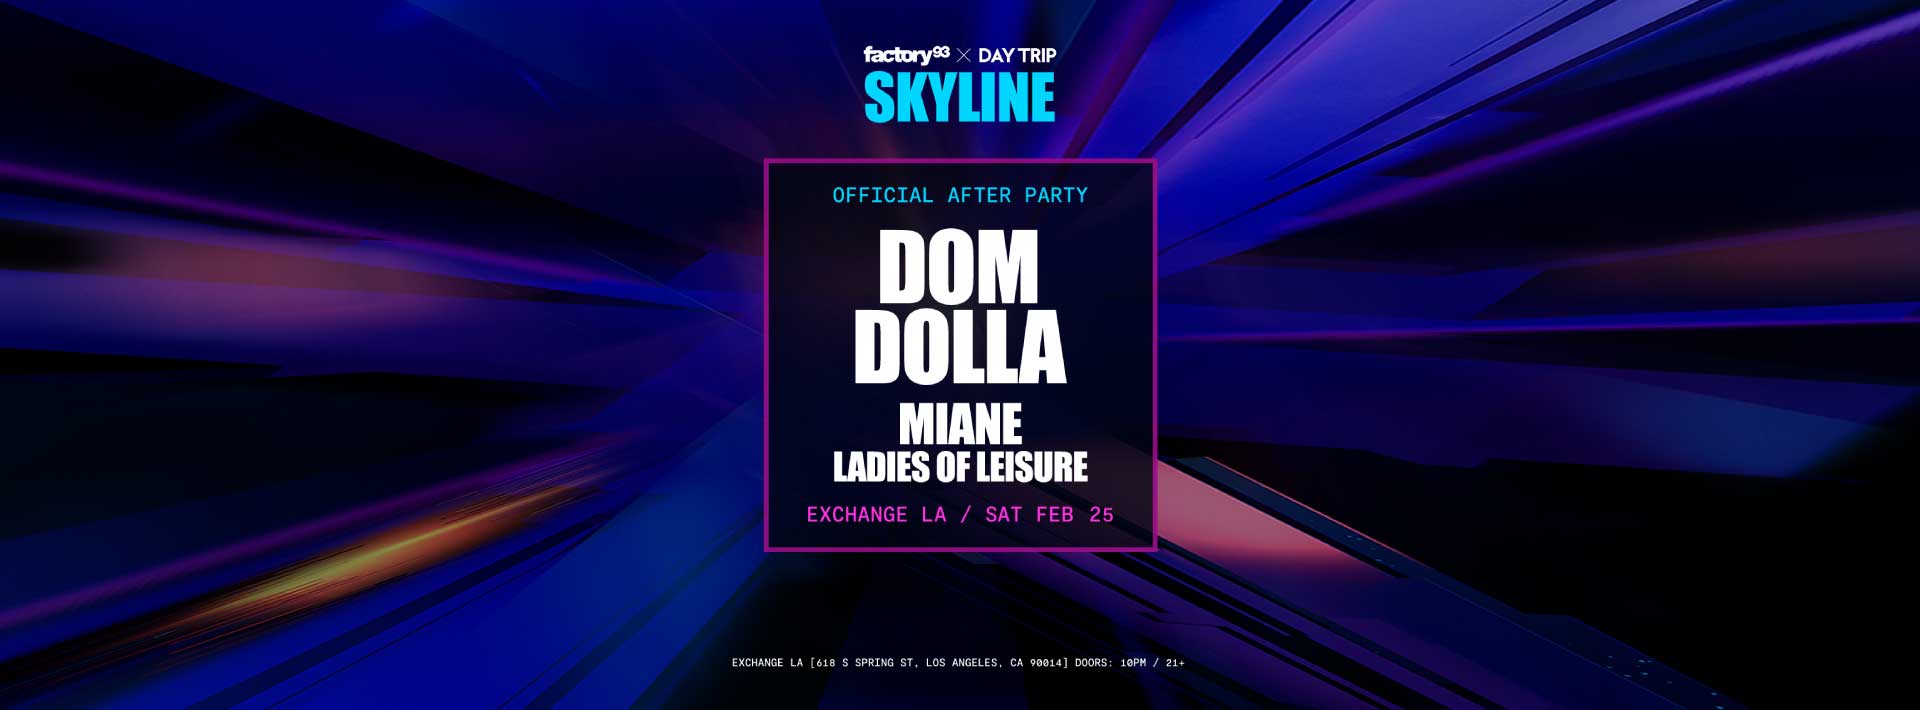 Skyline Afterparty: Dom Dolla